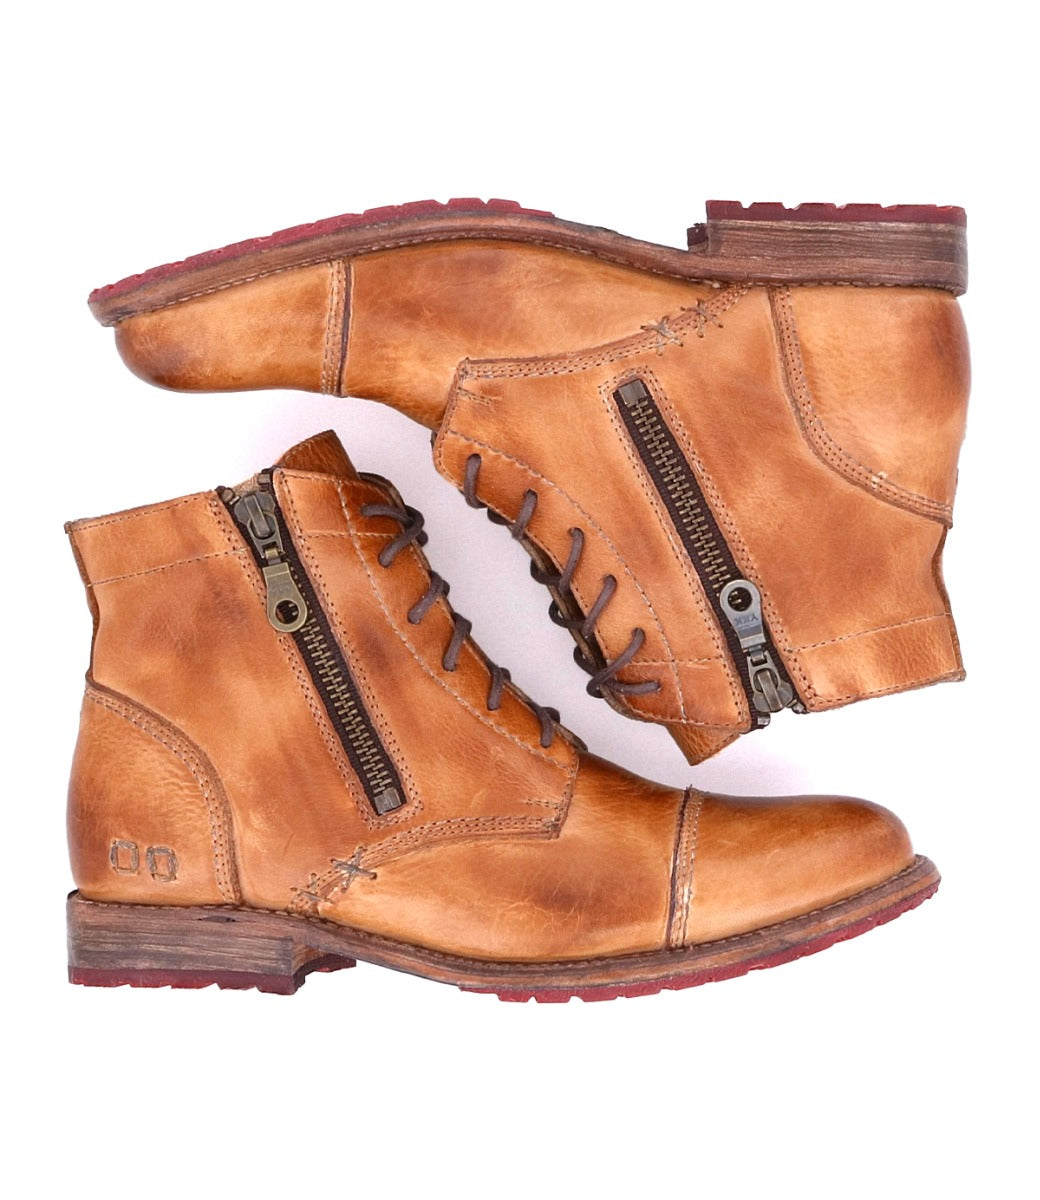 A pair of Bed Stu Bonnie II women's tan leather boots.